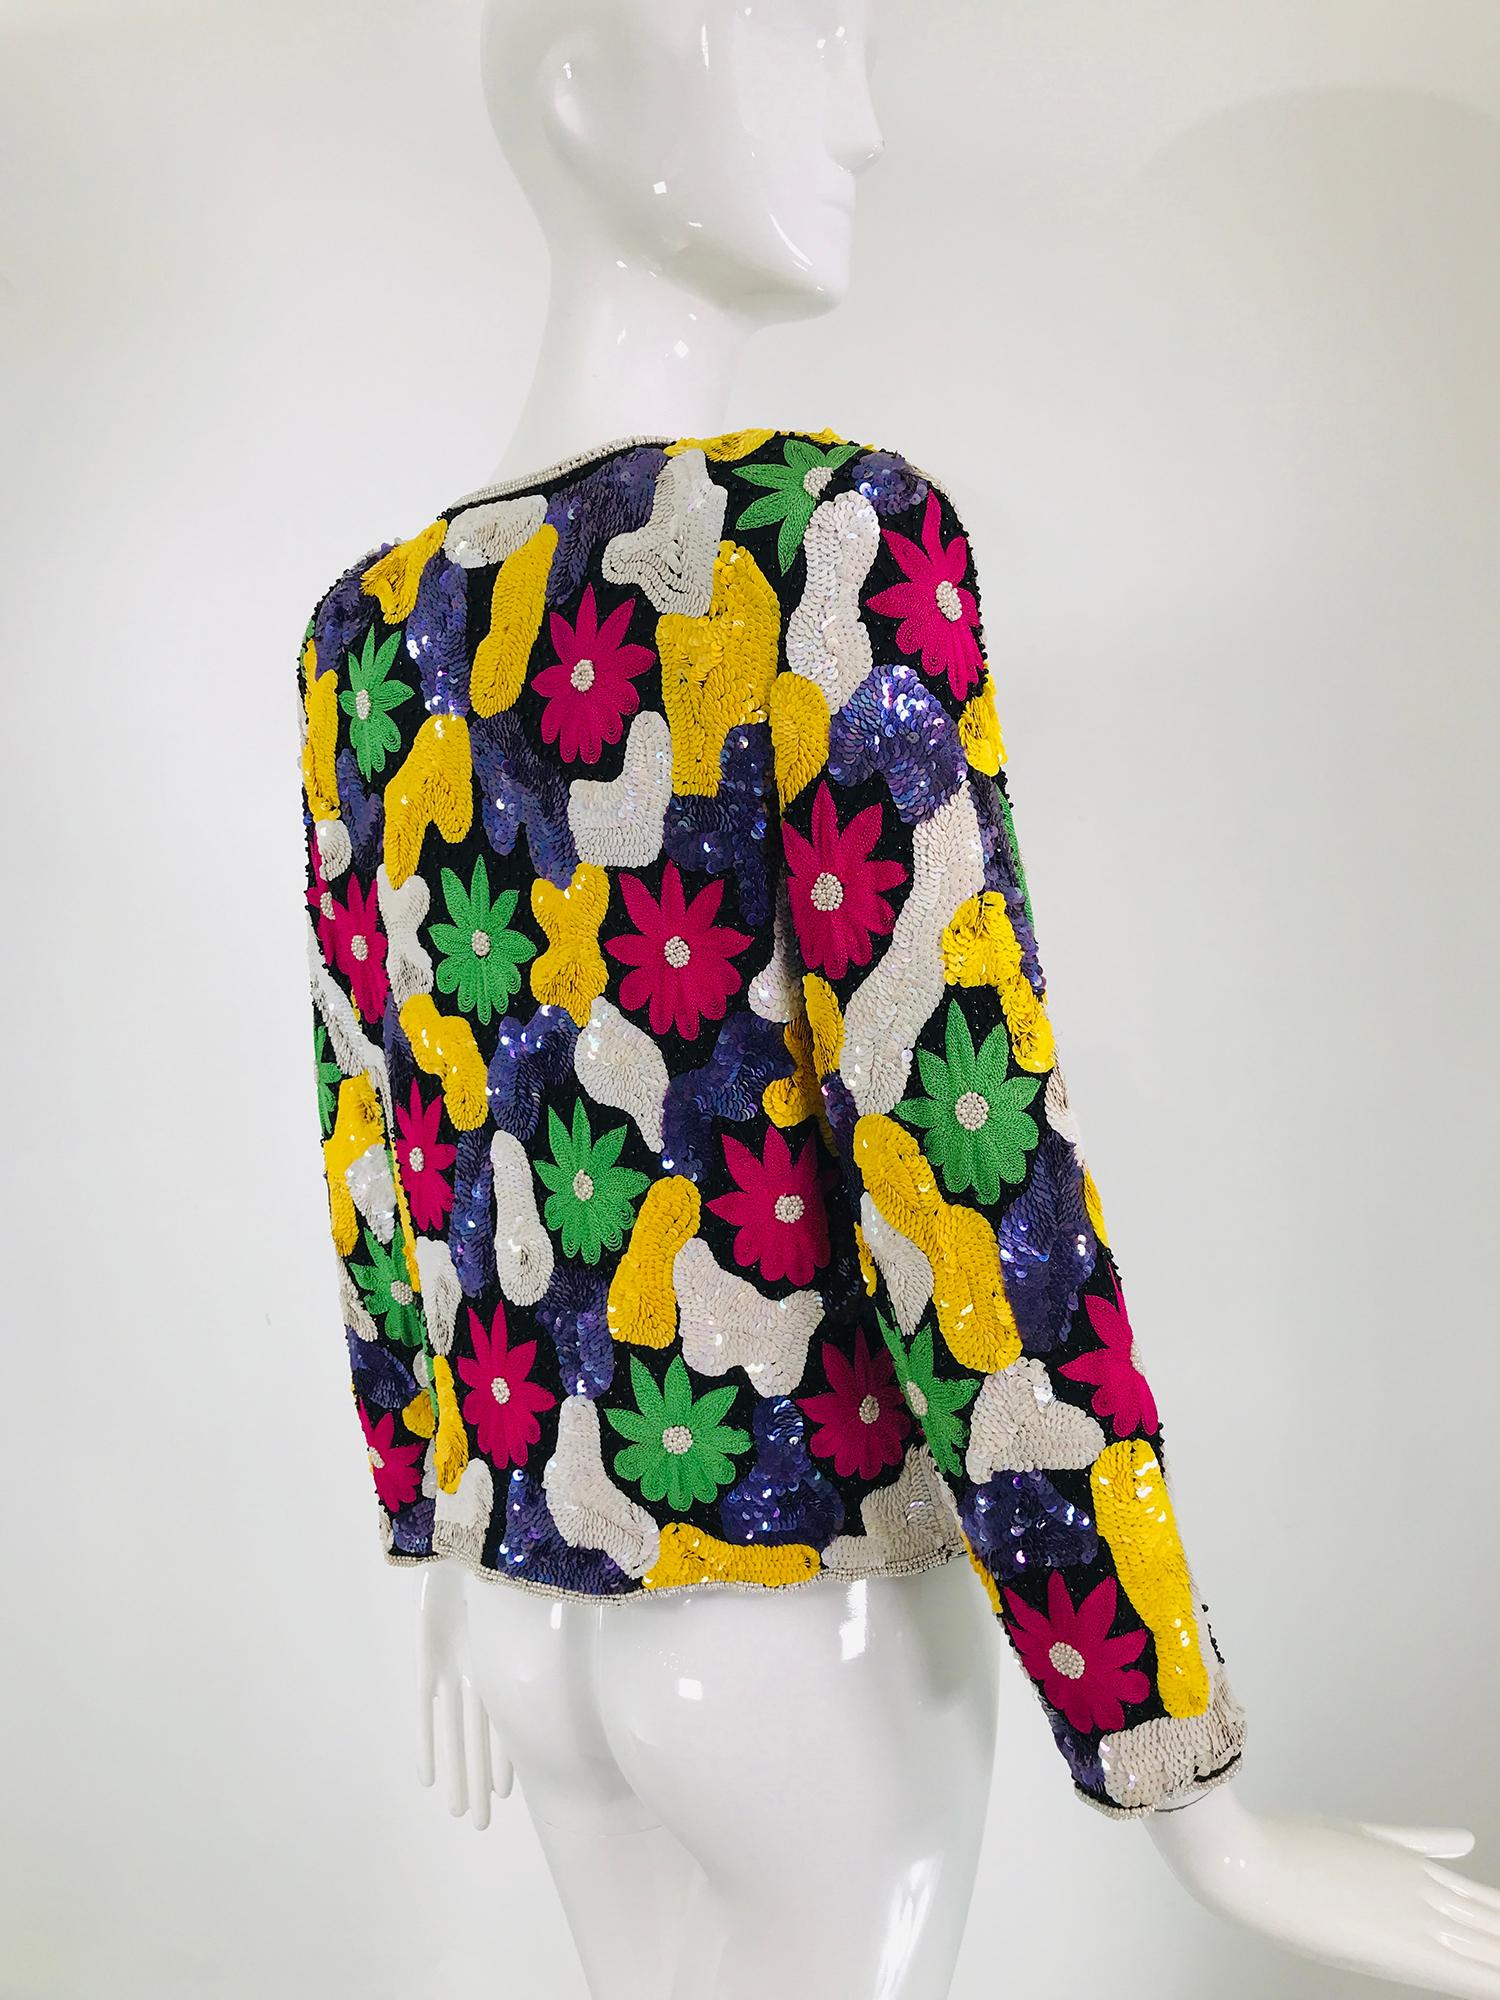 Amazing Vibrant Floral Sequin Silk Encrusted Jacket 1970s 4